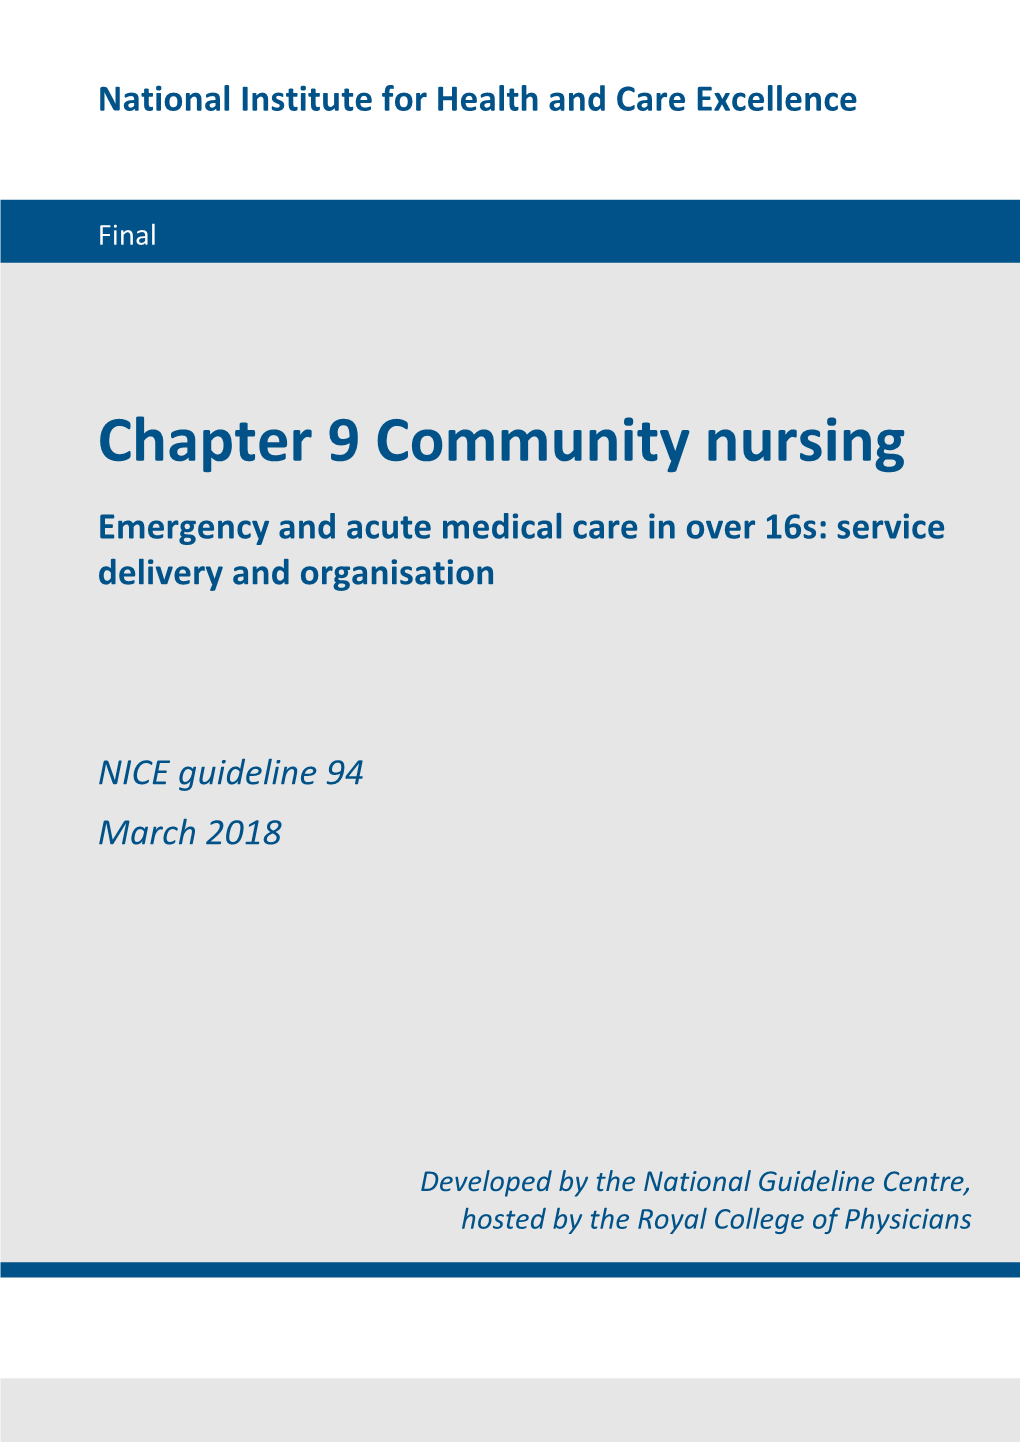 Chapter 9 Community Nursing Emergency and Acute Medical Care in Over 16S: Service Delivery and Organisation